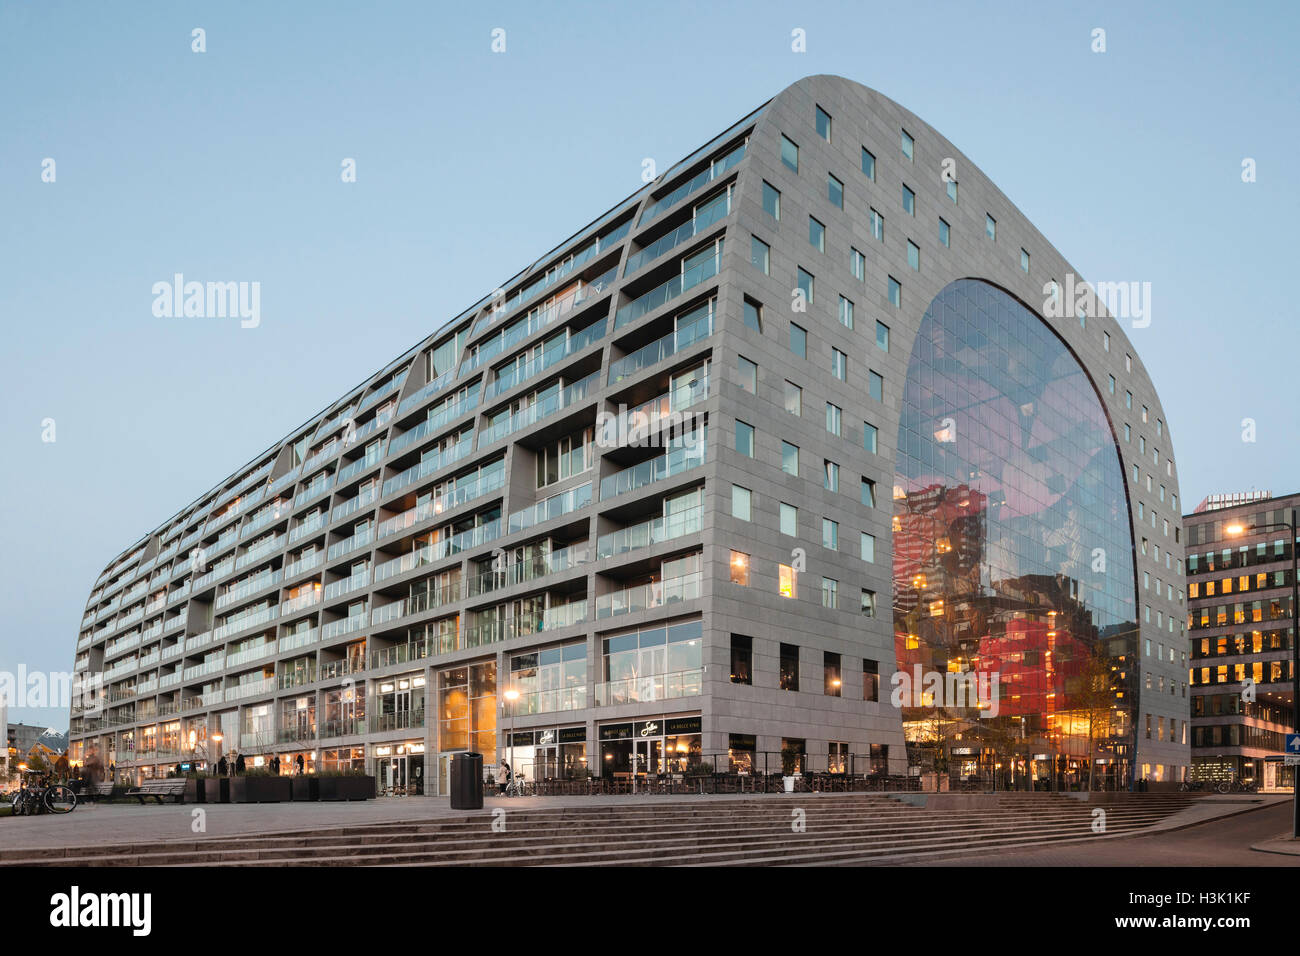 Side elevation of curved building with context and passersby on public square. Market Hall Rotterdam, Rotterdam, Netherlands. Architect: MVRDV, 2014. Stock Photo